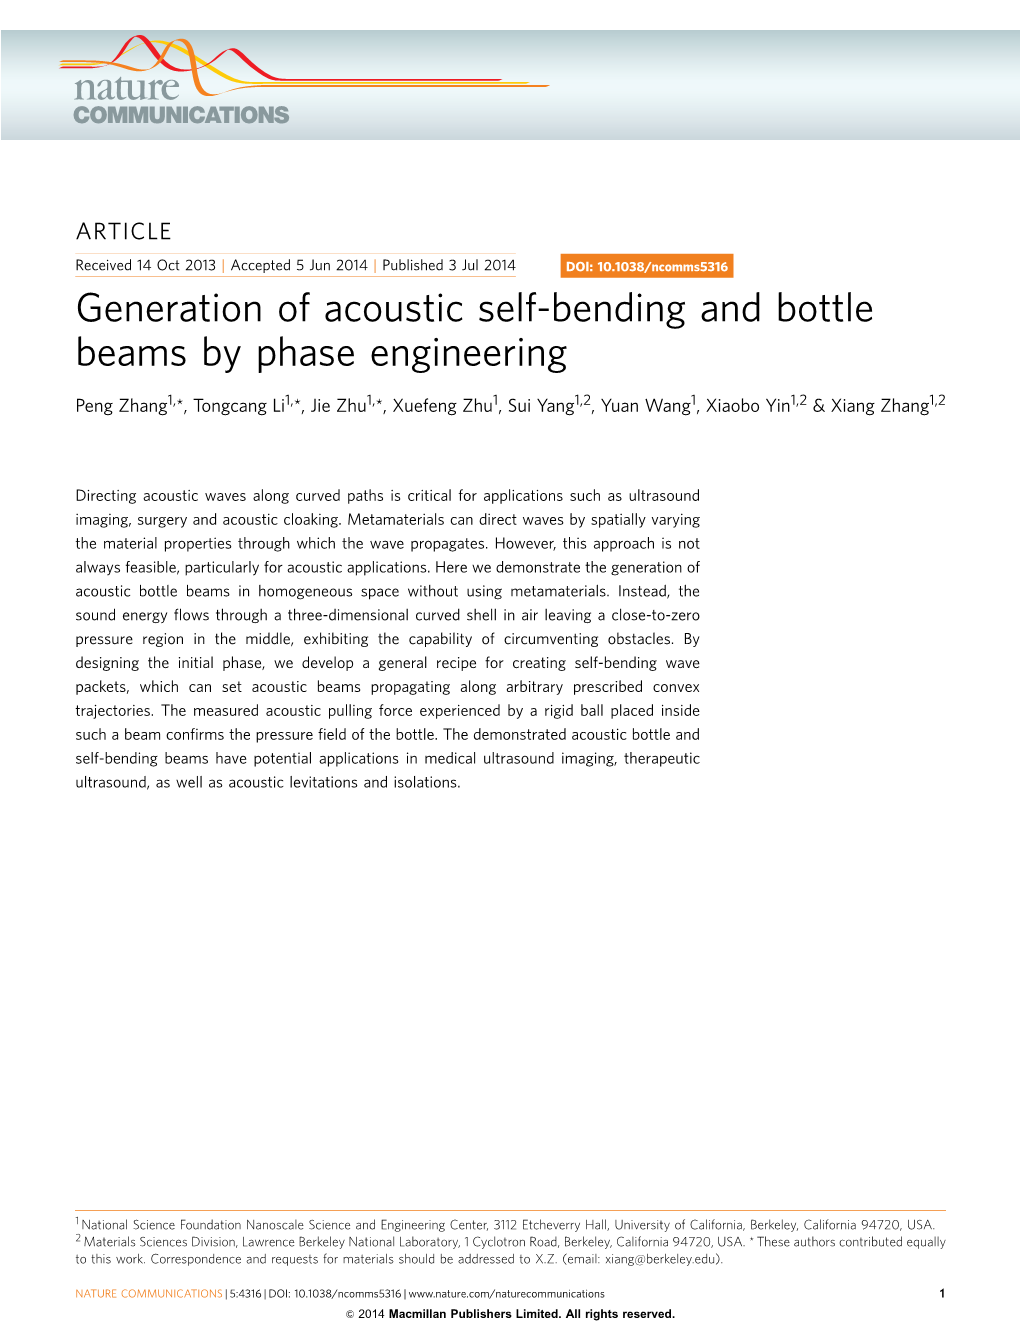 Generation of Acoustic Self-Bending and Bottle Beams by Phase Engineering